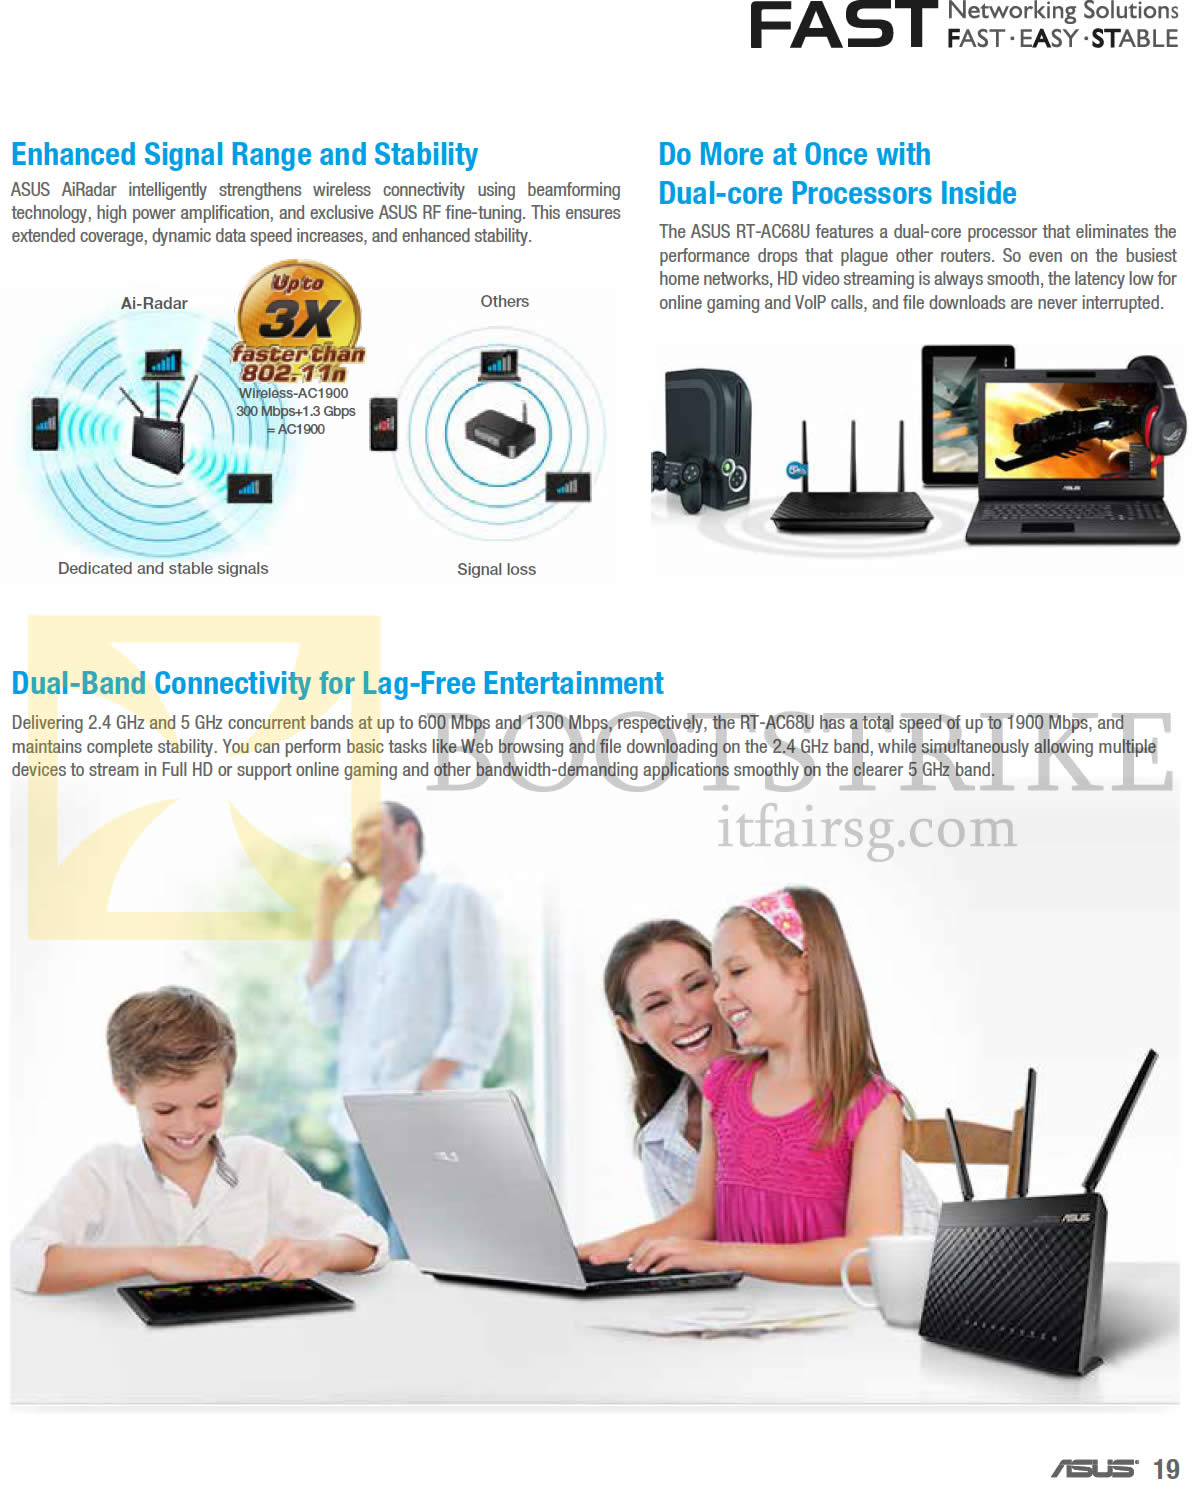 SITEX 2013 price list image brochure of ASUS Networking Router Features, Fast AiRadar, Dual Band